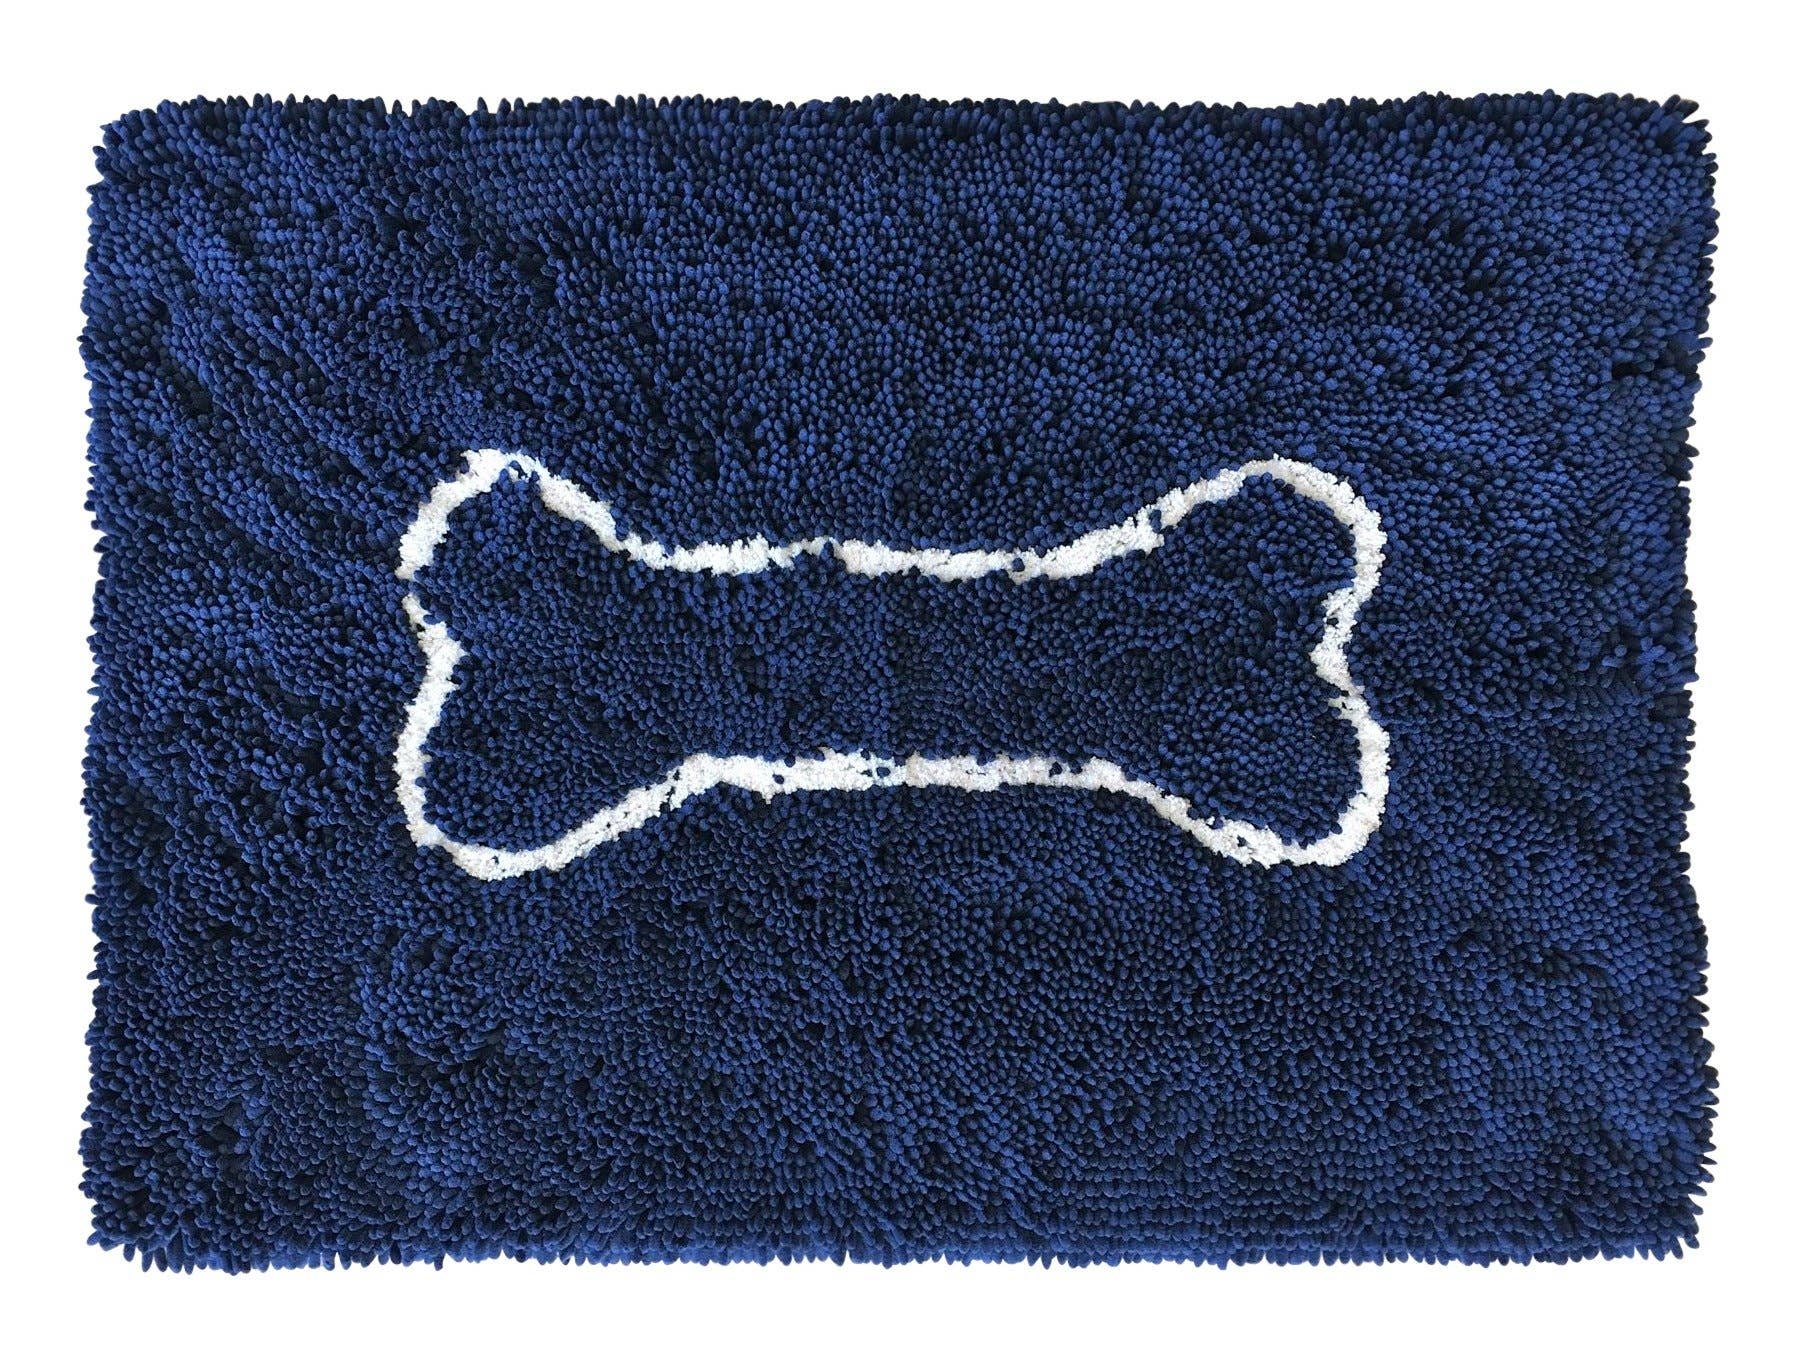 Soggy Doggy Doormat - Extra Large Navy Blue Soggy Doggy Doormat